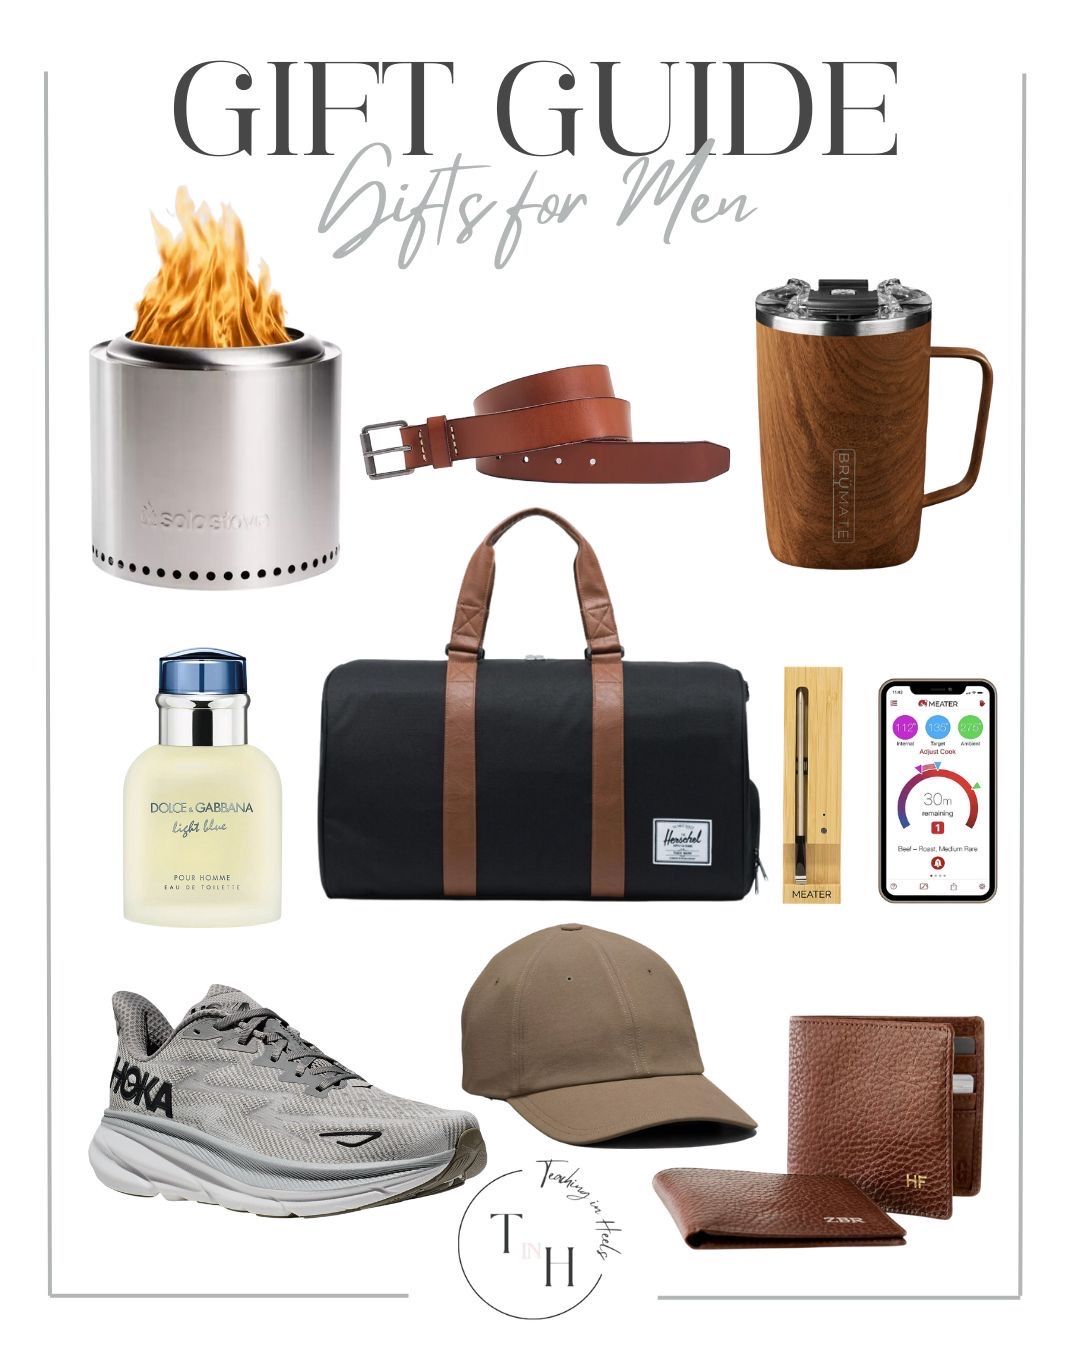 Holiday Gift Guides for Everyone on Your List #women #men #gift #guide #holiday #Christmas #shopping #buying # Birthday #Mother'sday #Father'sday #Under25 #FromUlta #Booklover #Teachers #Kids #Sephora #Men #FitnessFanatic #TeenBoys 